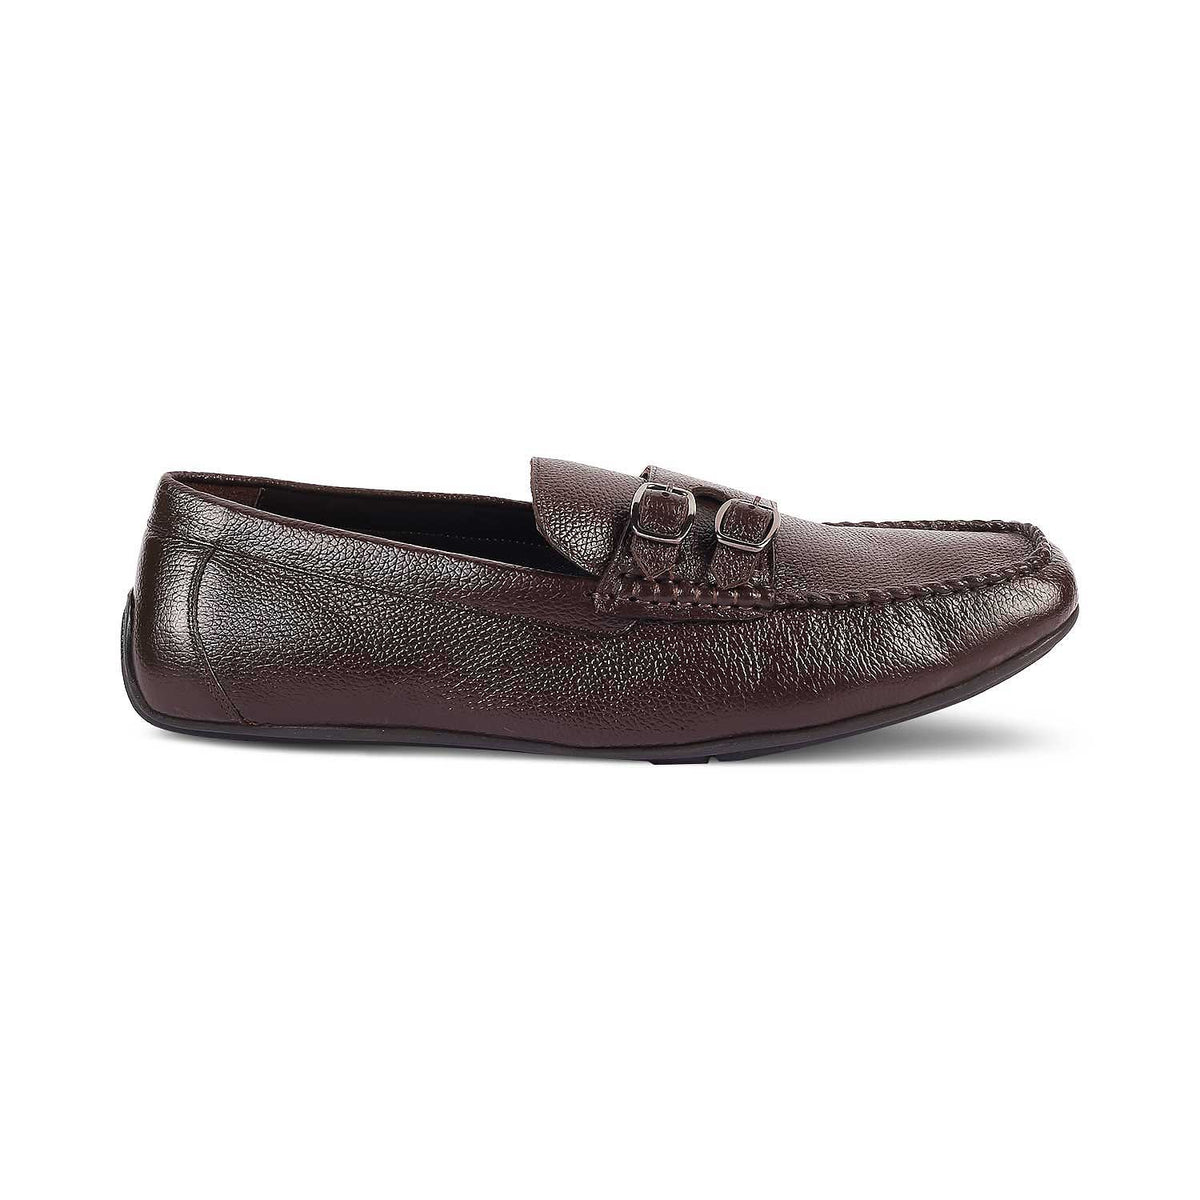 The Roby Brown Men's Double Monk Shoes Tresmode